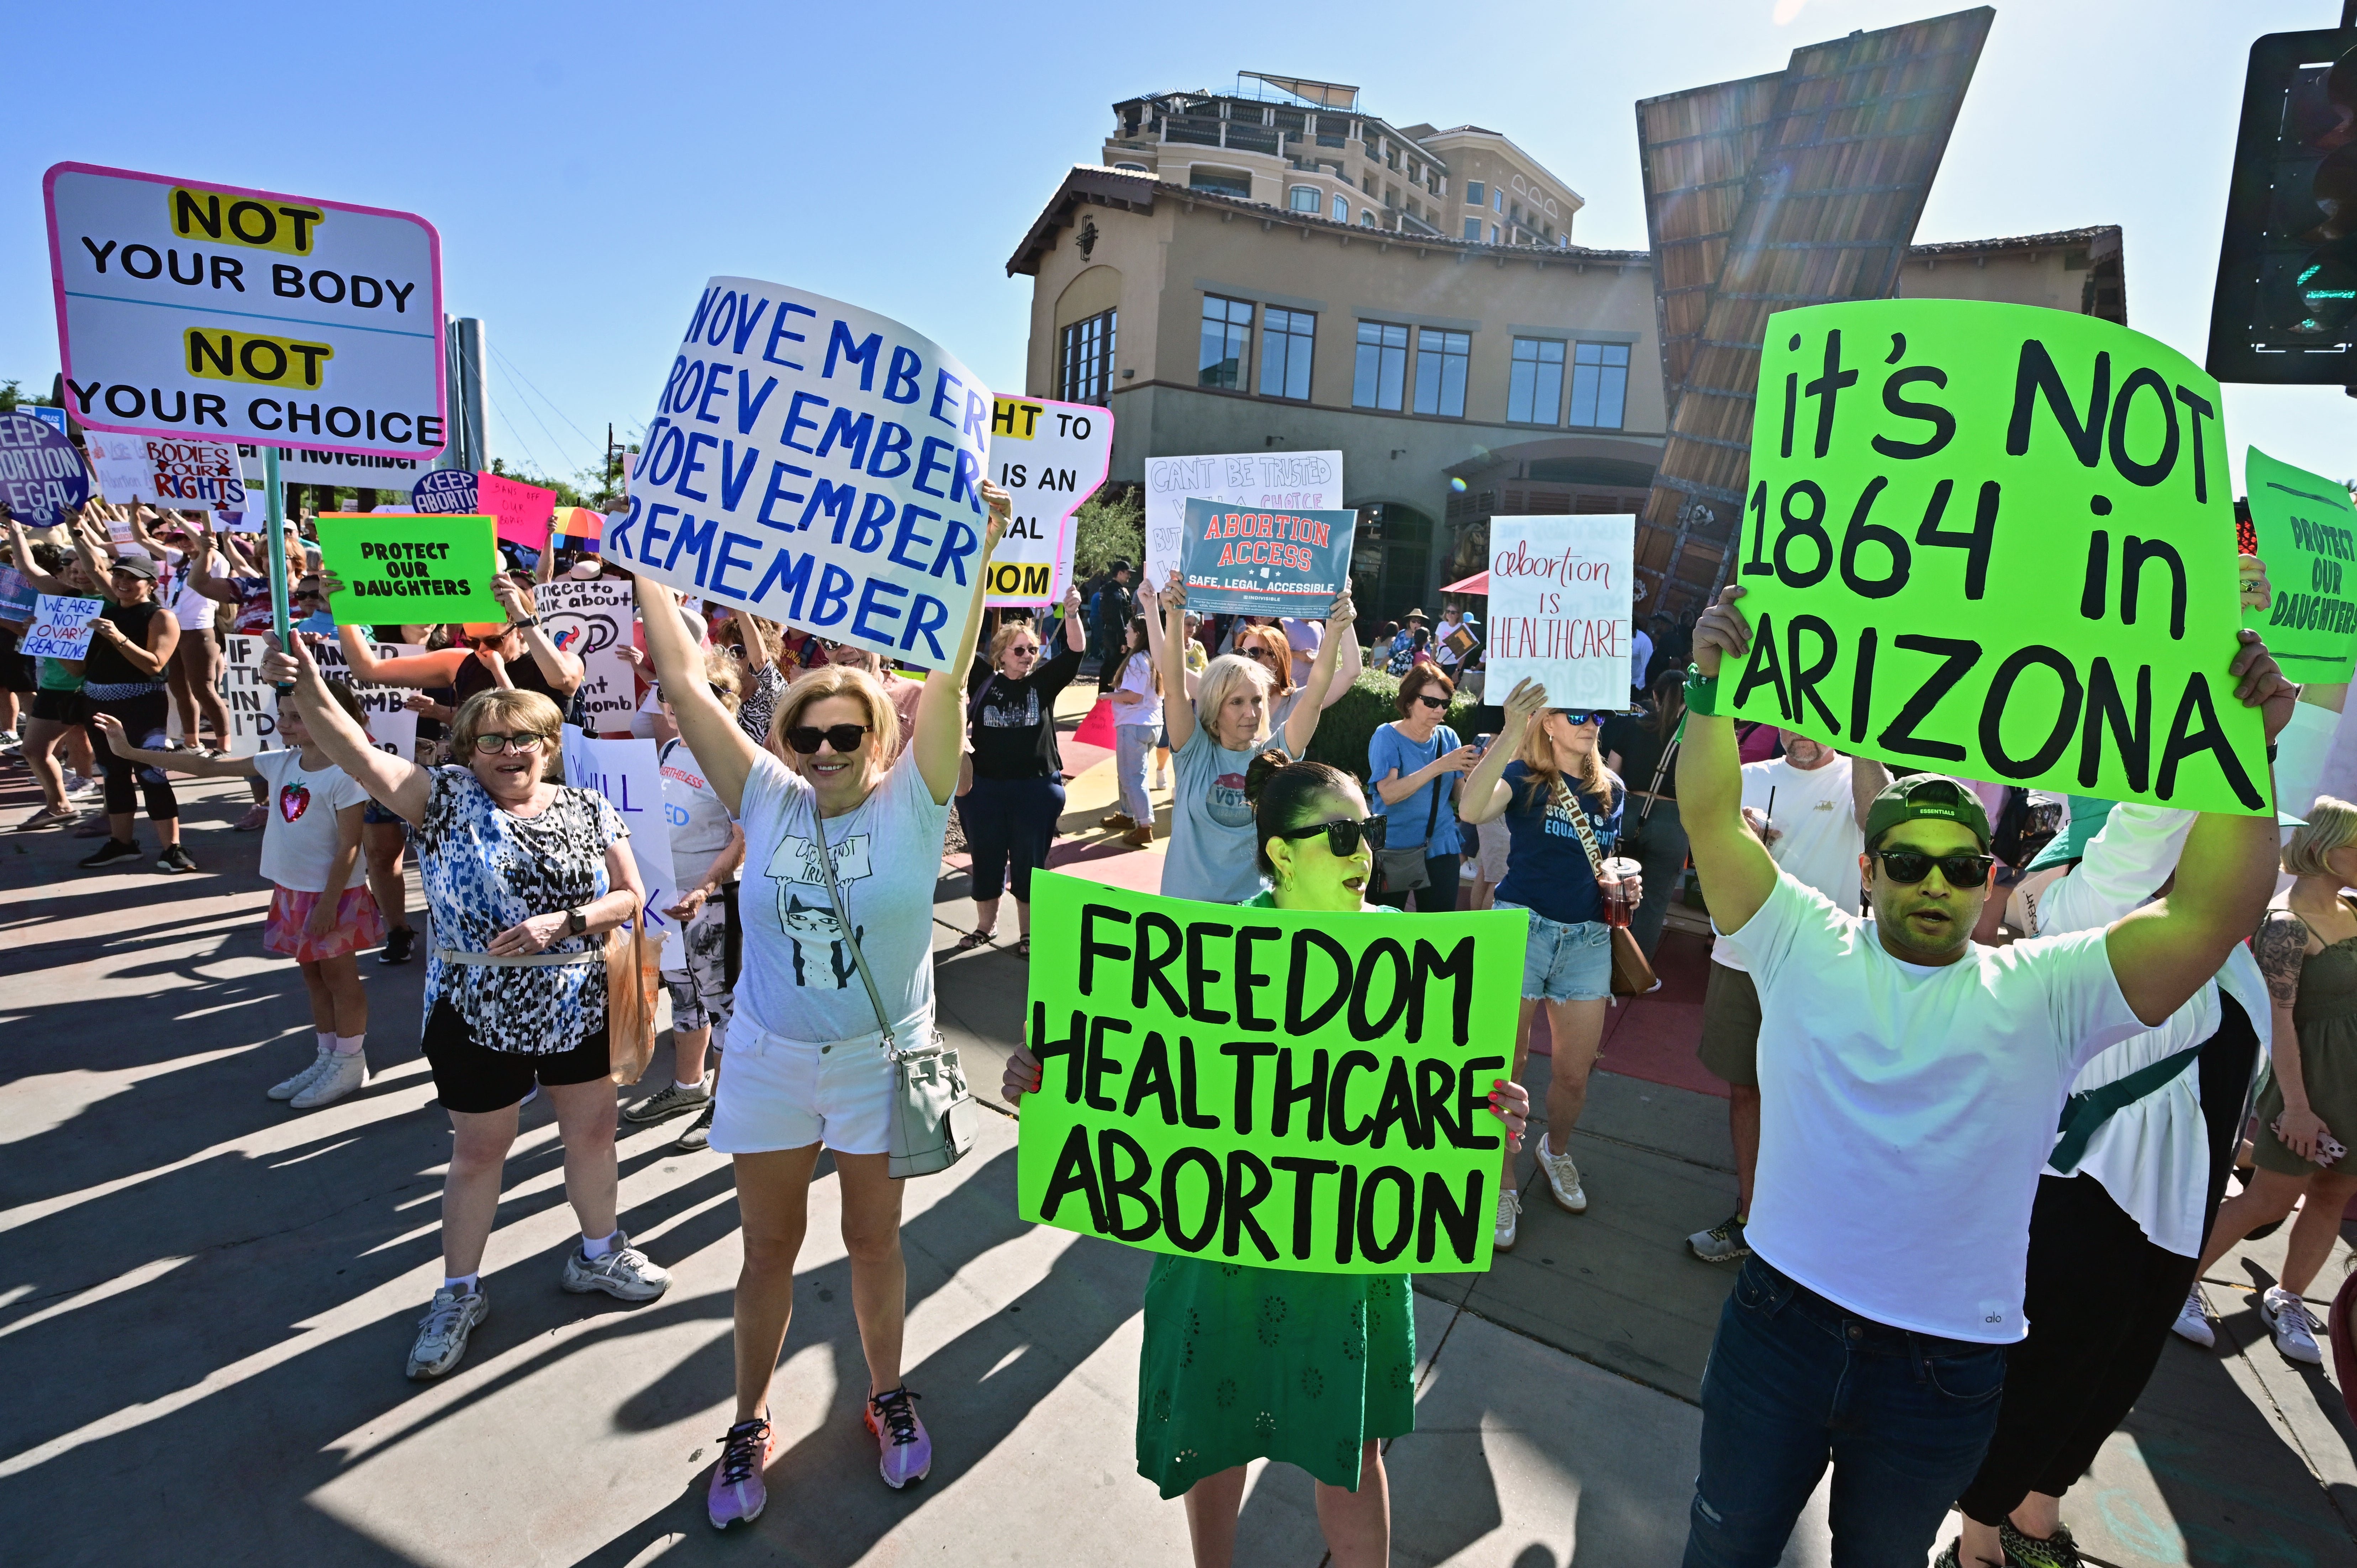 A crowd of people carry pro-abortion signs